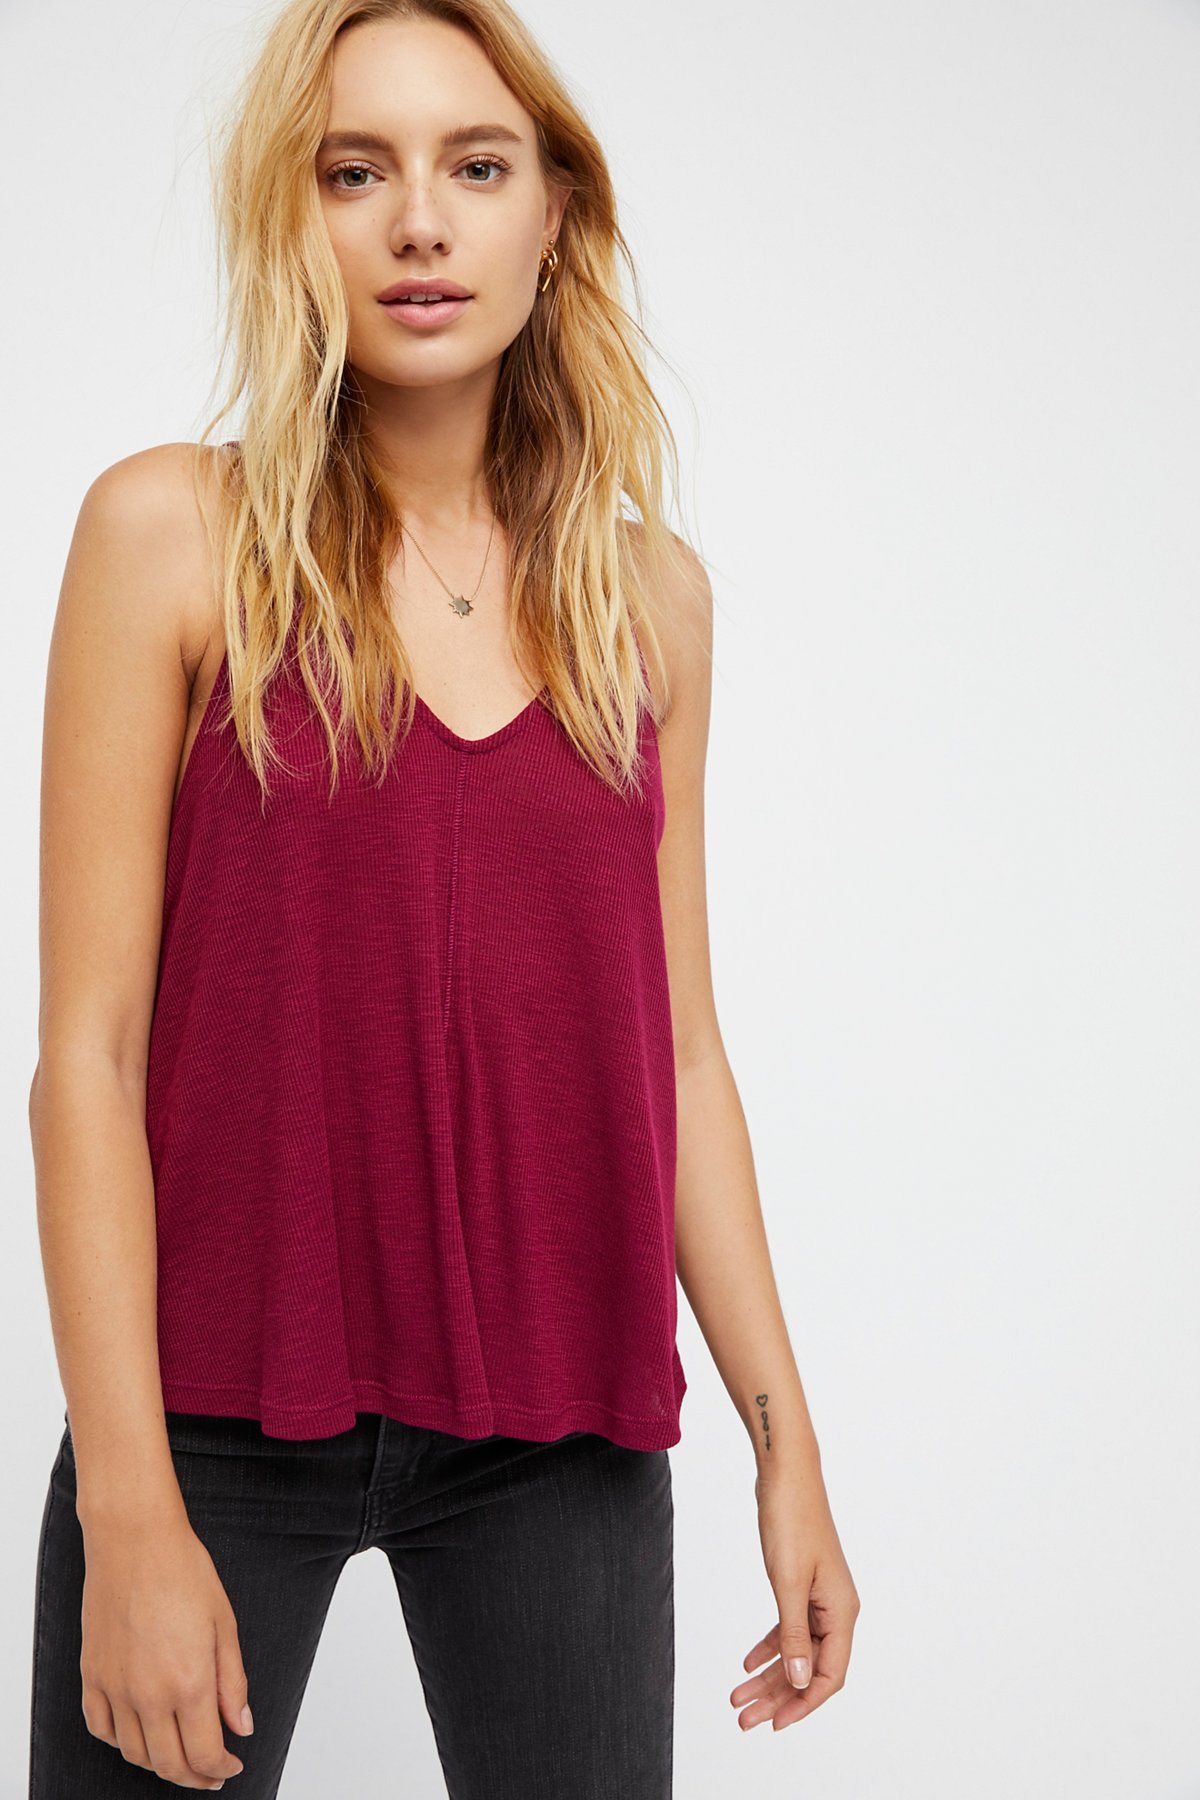 Camis & Camisole Tops | Lace, Racerback & More | Free People